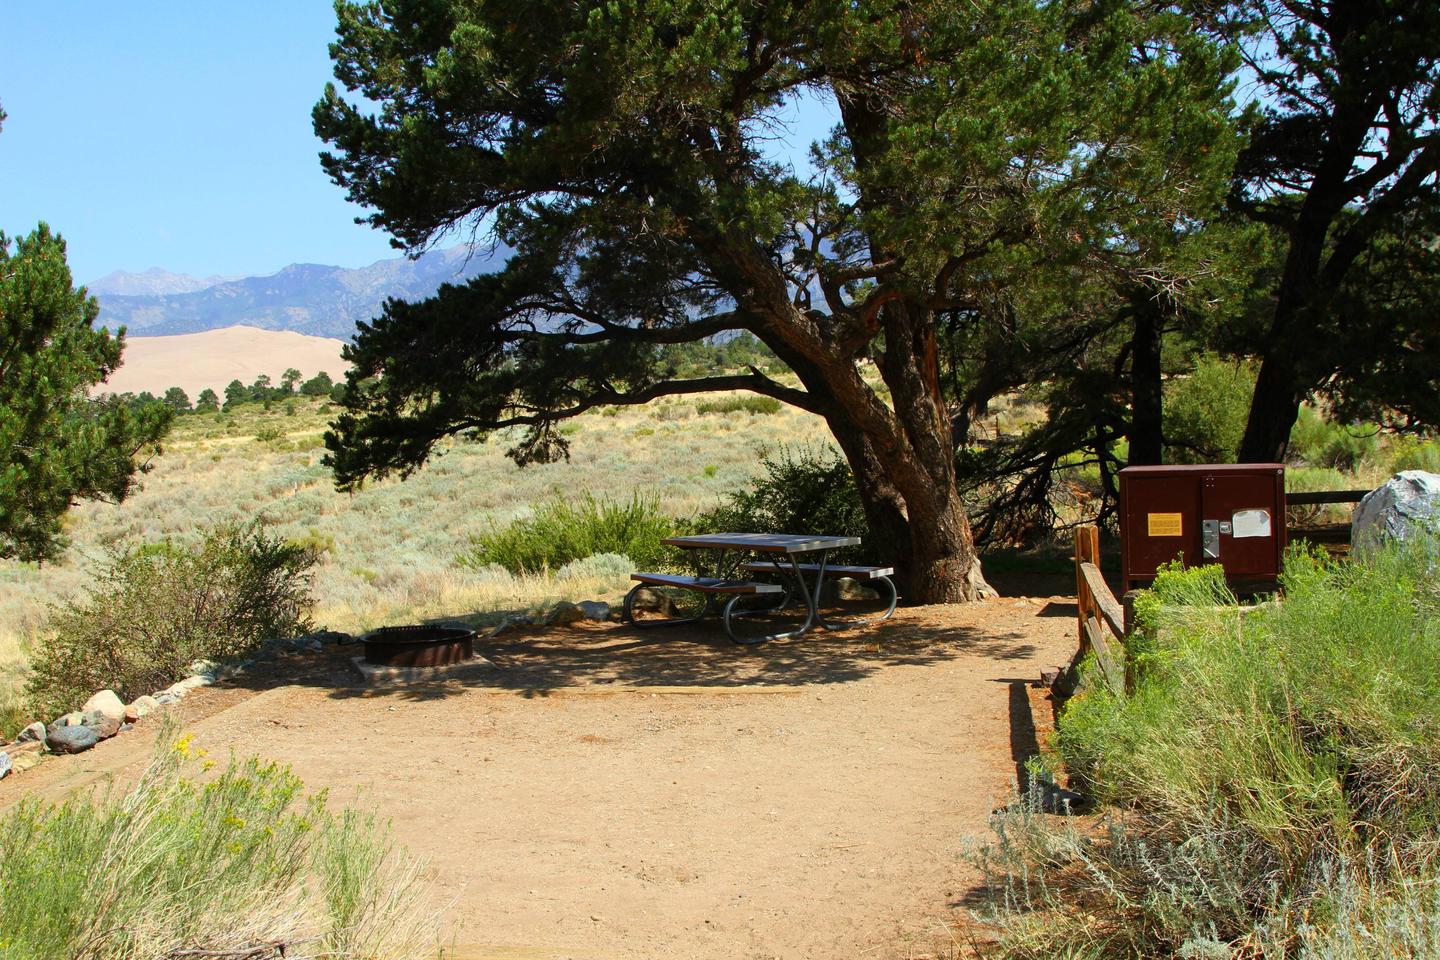 View of Site #26 fenced and designated tent pad, fire ring, picnic table, and bear box. Pine trees provide mild shade.Site #26, Pinon Flats Campground